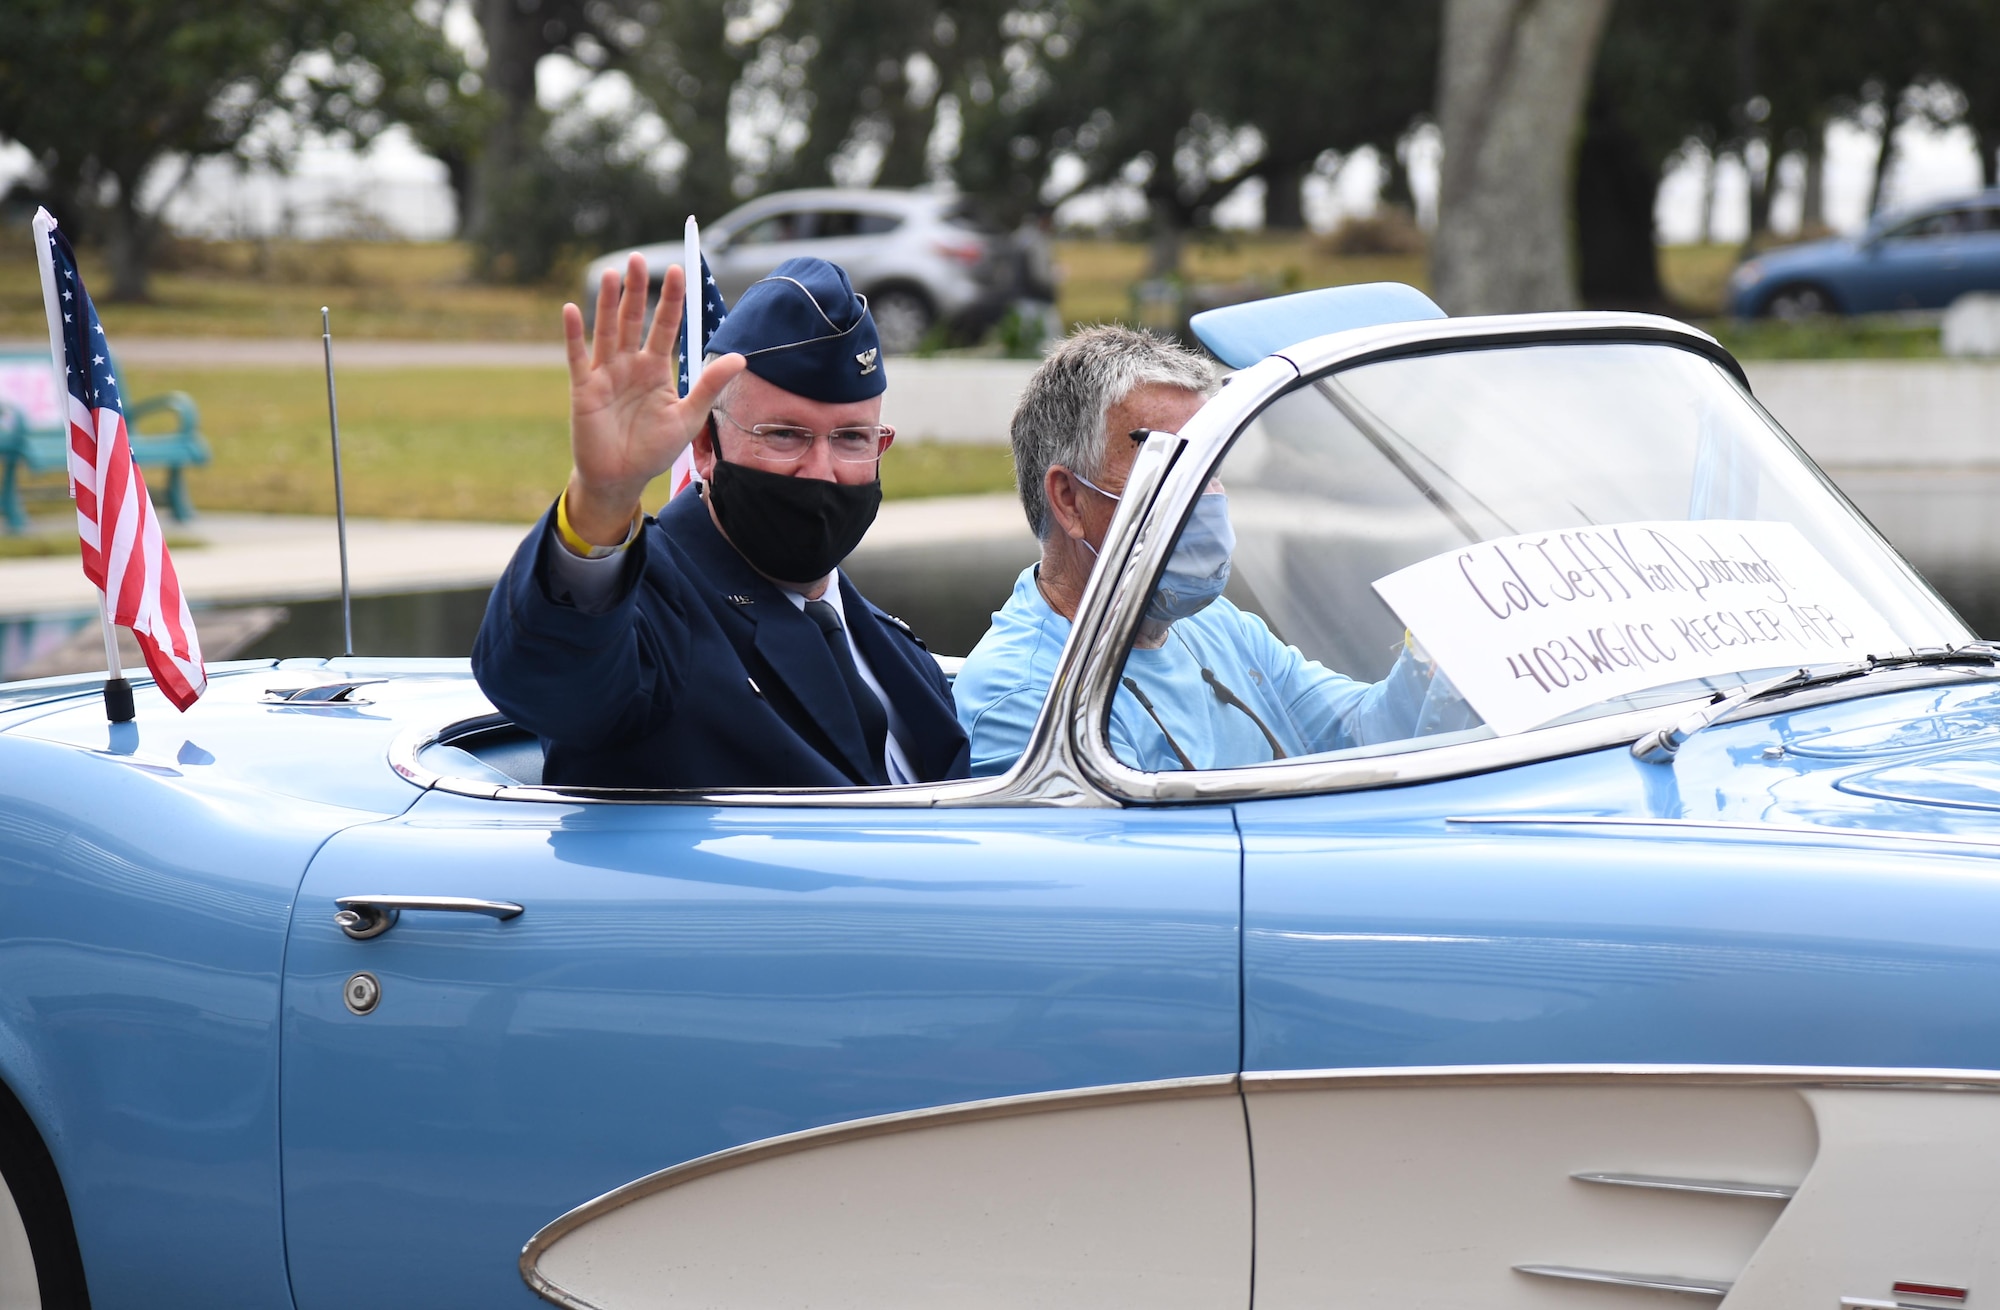 U.S. Air Force Col. Jeff Van Dootingh, 403rd Wing commander, waves to veterans during the Gulf Coast Veteran's Day Roll-Thru and Wave Parade outside the Armed Forces Retirement Home at Gulfport, Mississippi, Nov. 7, 2020. Keesler Air Force Base leadership participated in the parade in support of all veterans past and present. (U.S. Air Force photo by Kemberly Groue)